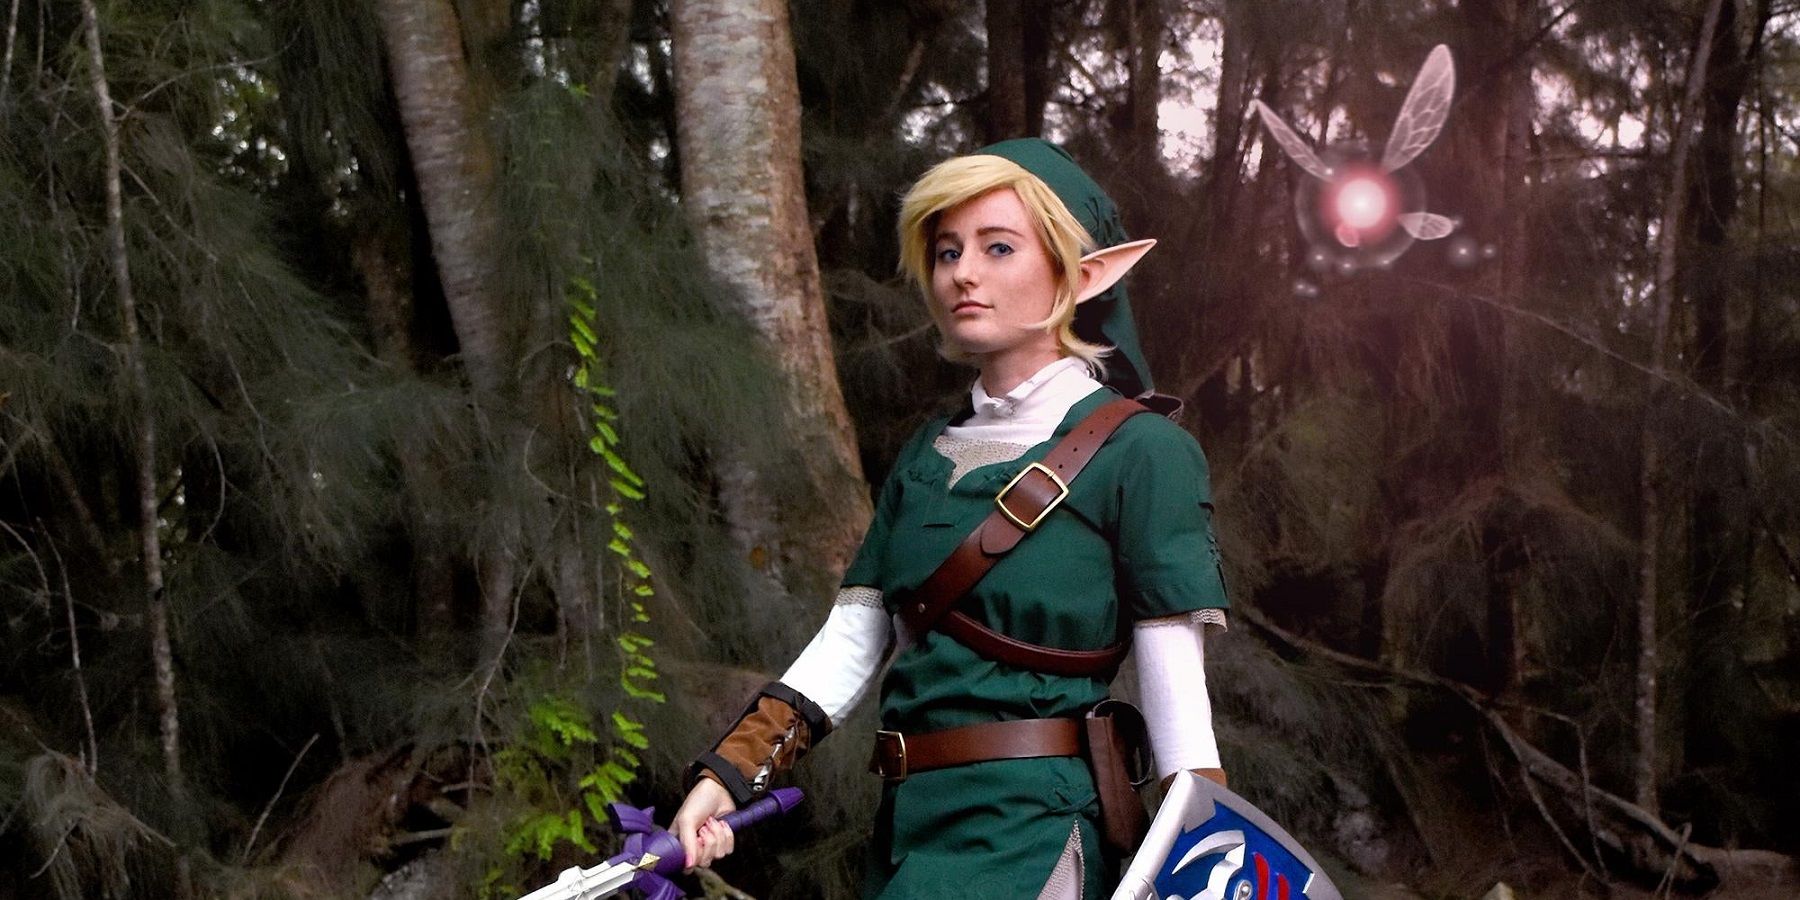 A cosplay of Twilight Princess Link walking through a darkened forest.